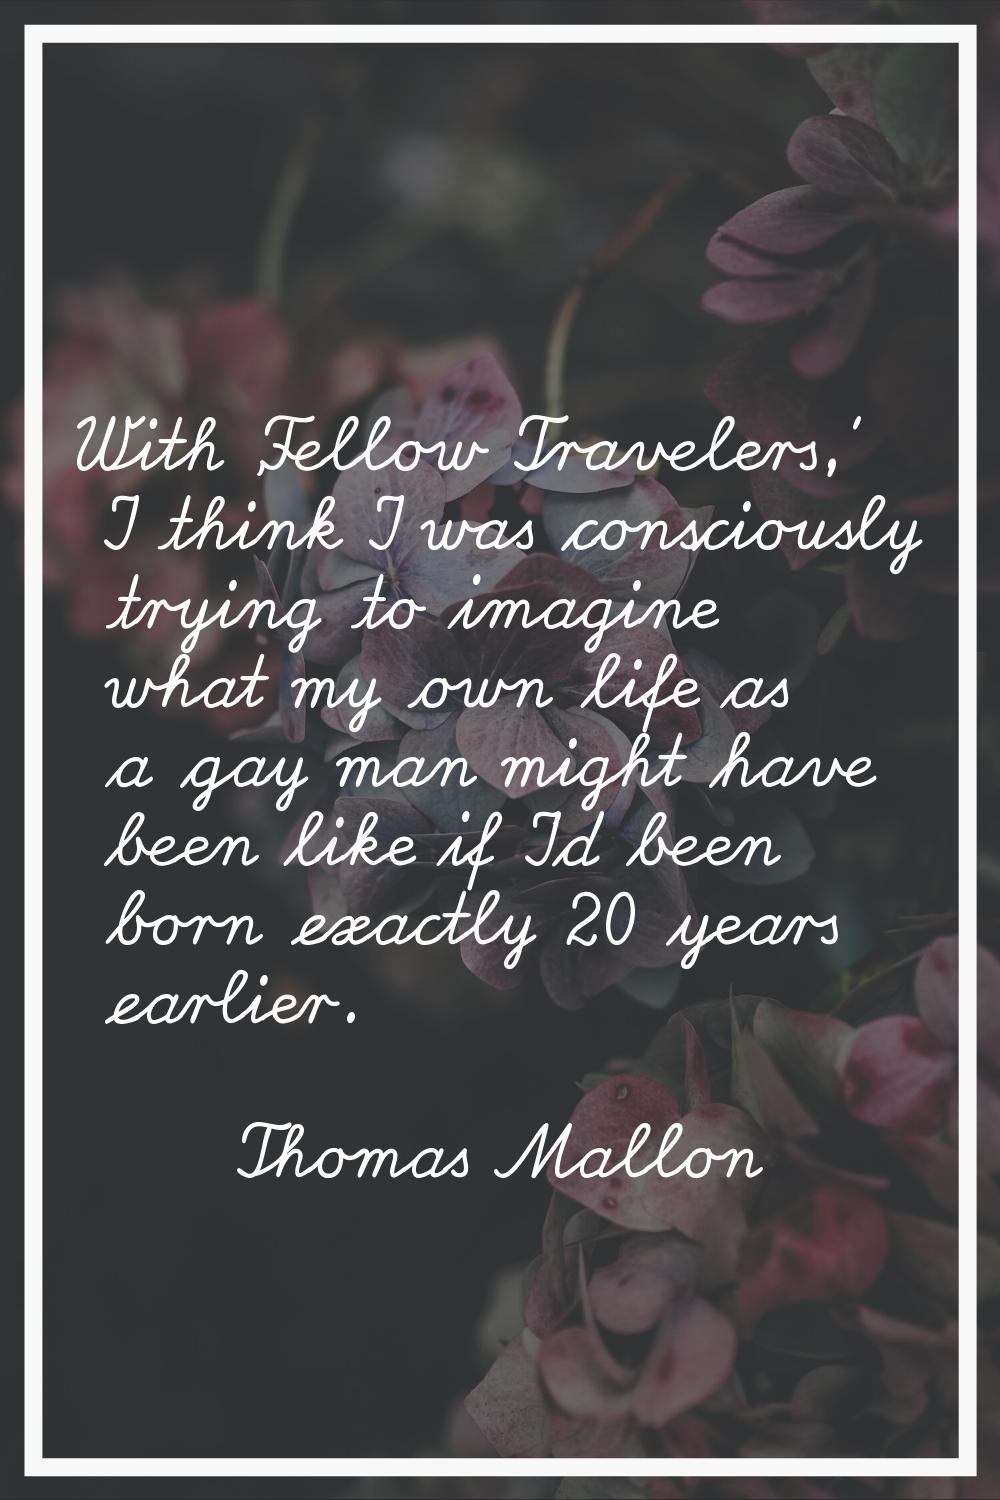 With 'Fellow Travelers,' I think I was consciously trying to imagine what my own life as a gay man 